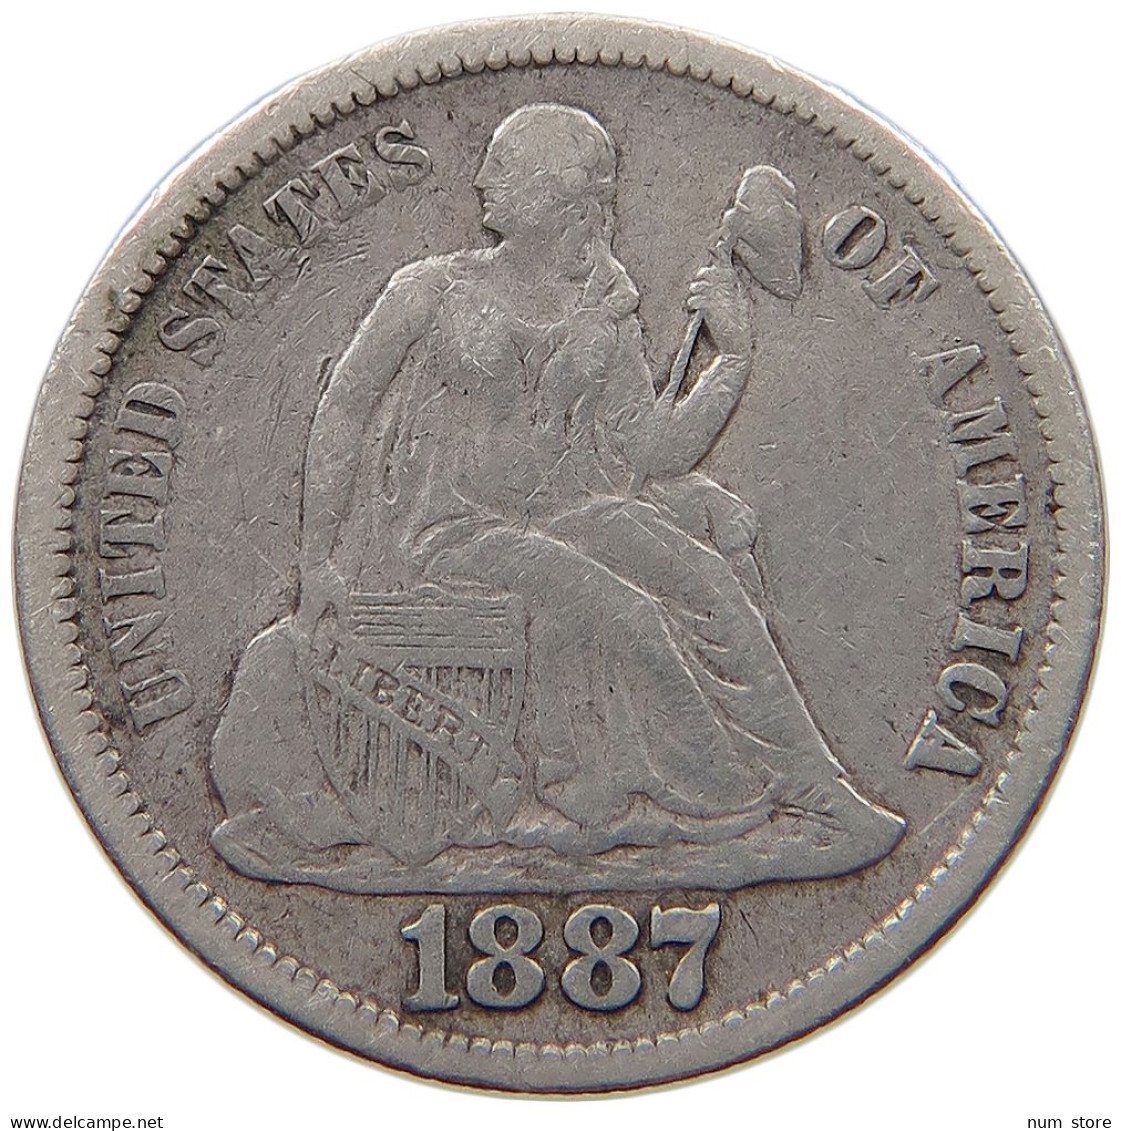 UNITED STATES OF AMERICA DIME 1887 SEATED LIBERTY #t114 0099 - 1837-1891: Seated Liberty